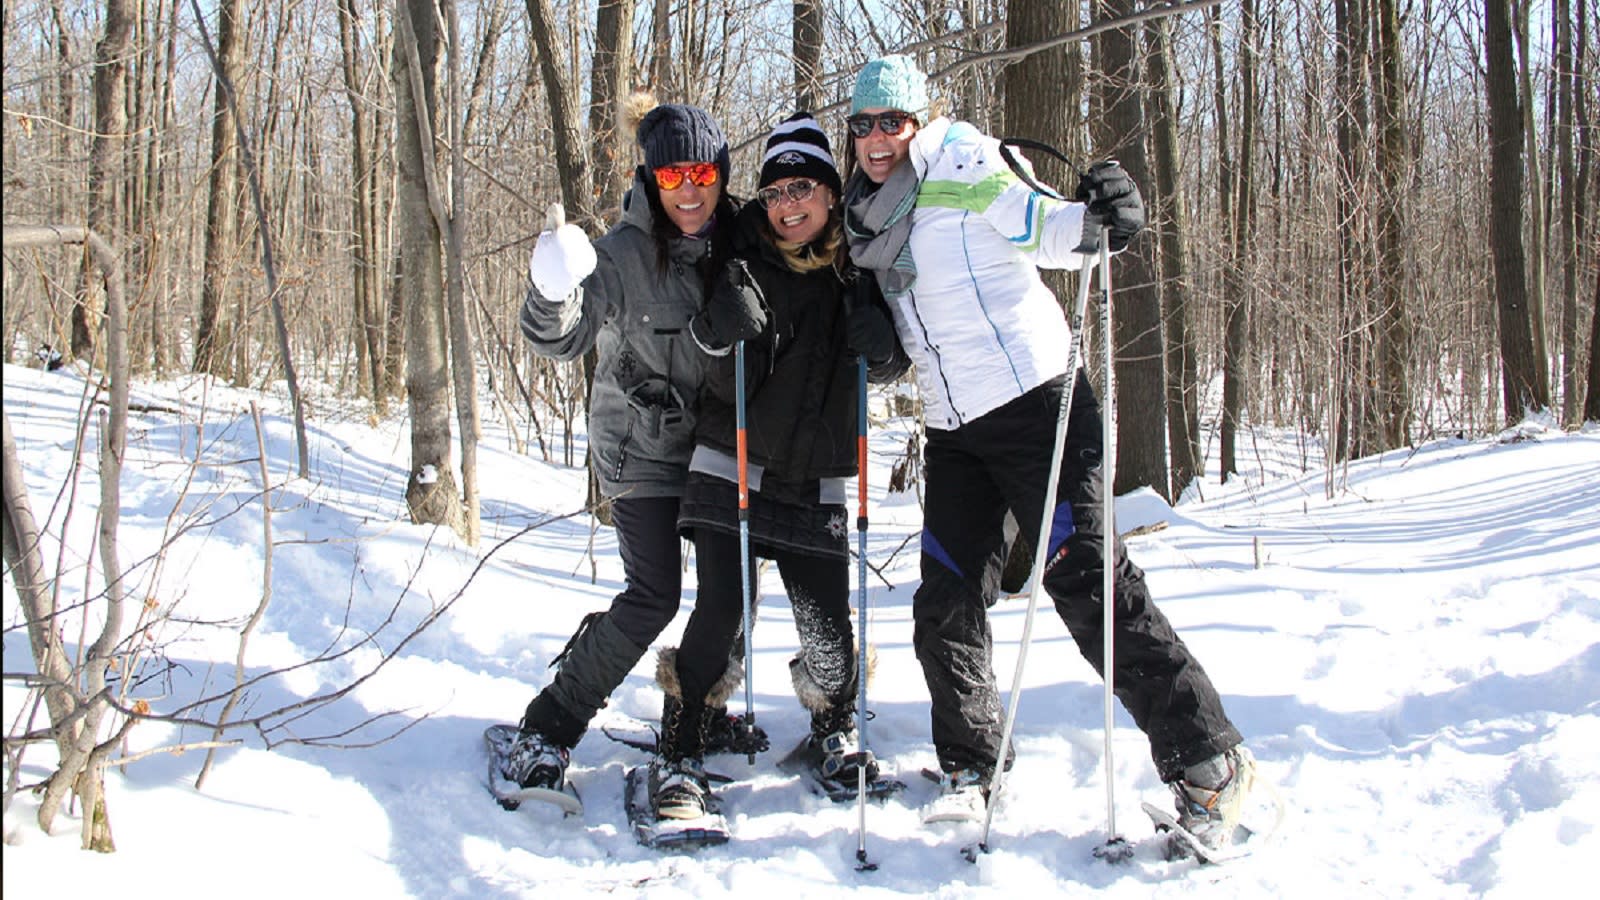 Snowshoeing in the Laurel Highlands can be fun and great excercise